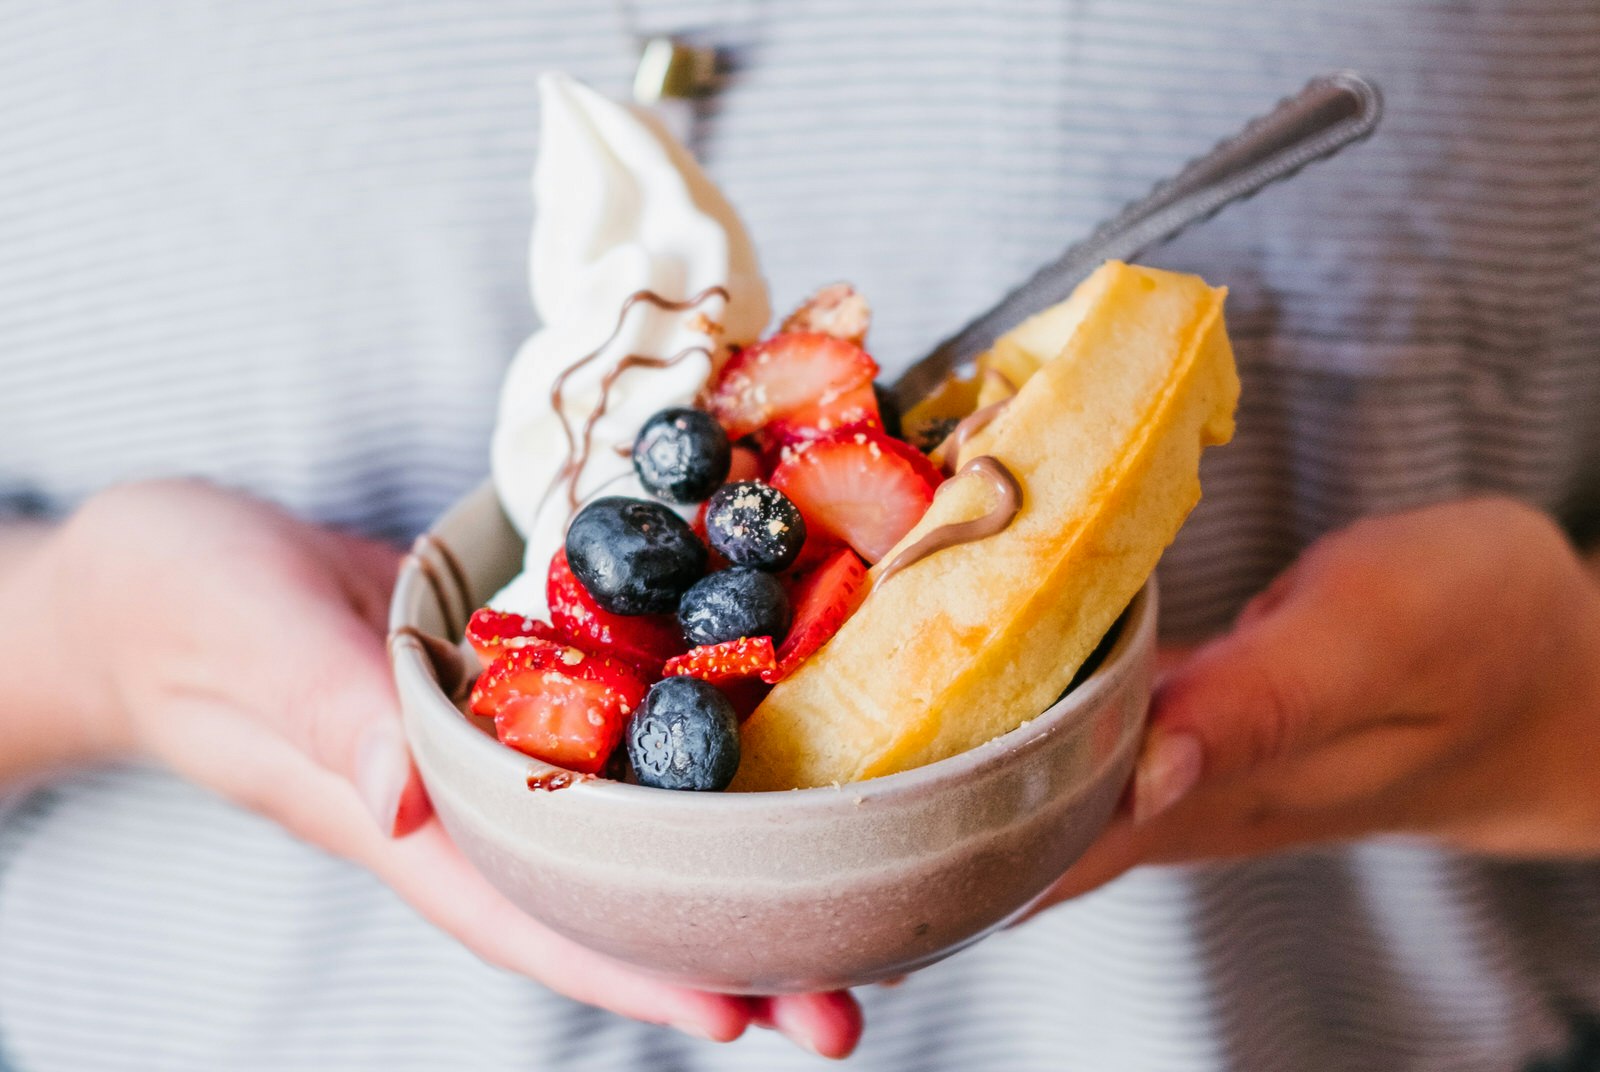 A bowl heaped with strawberries, blueberries, vegan cream and a waffle; the bowl cupped by a pair of hands